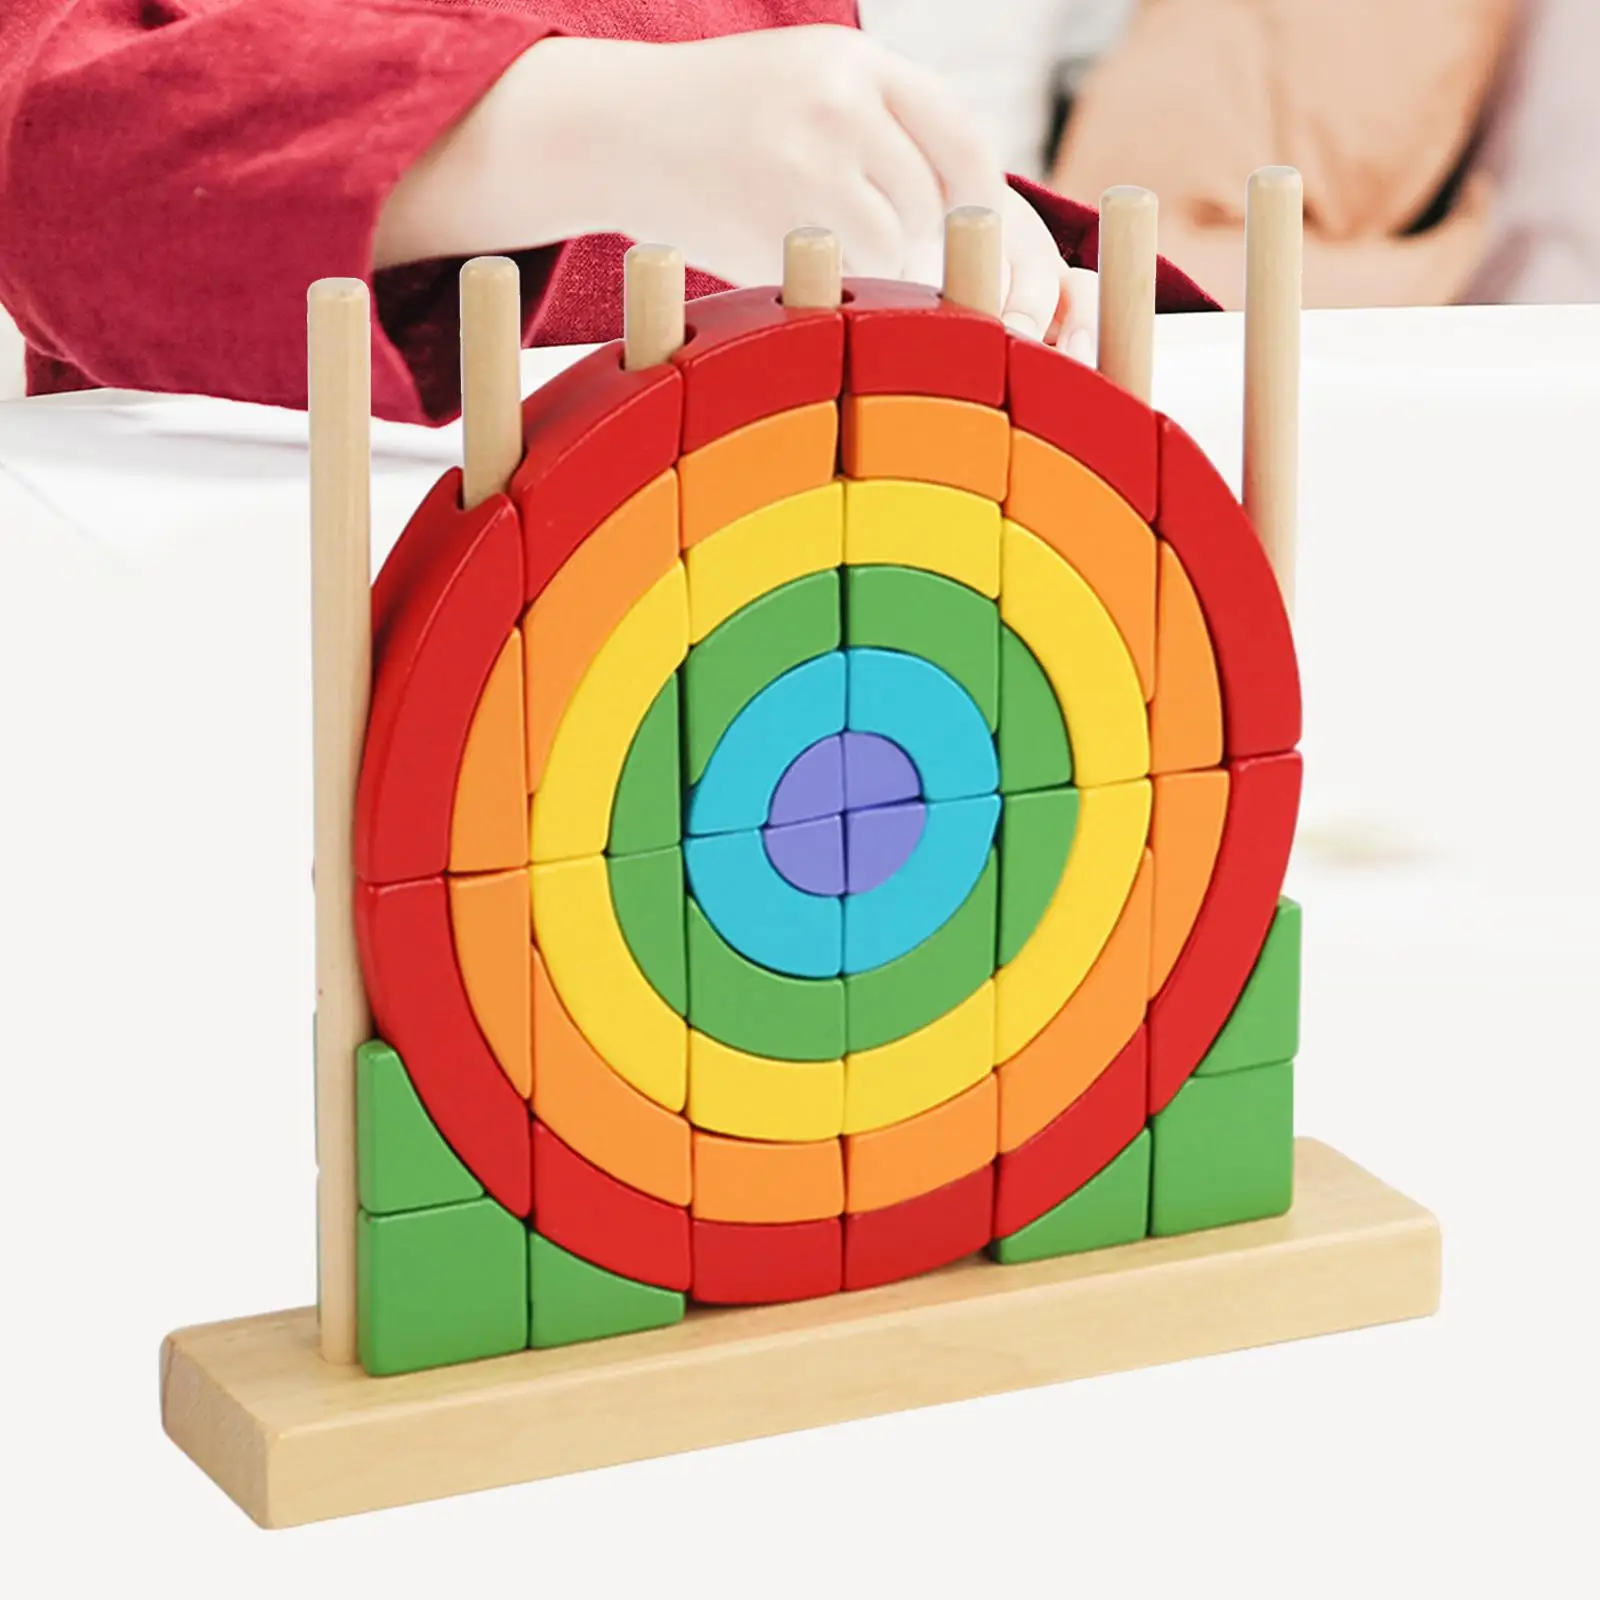 Wooden Rainbow Stacking Toy Rainbow Stacker for Boys Age 4 5 6 Holiday Gifts